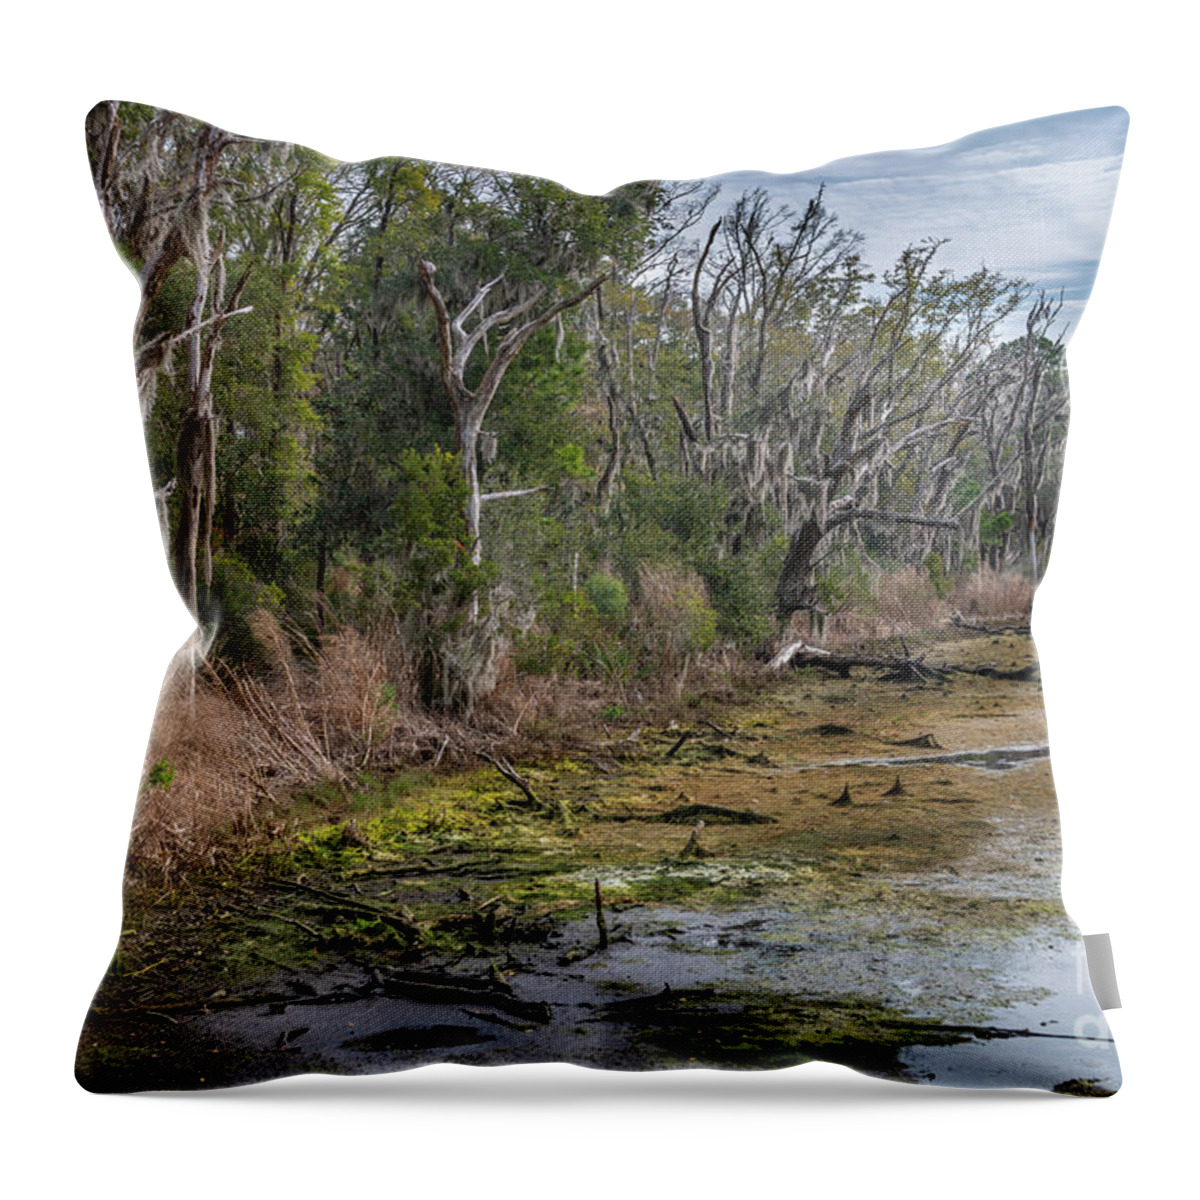 Marsh Throw Pillow featuring the photograph Salty Shore - Ace Basin by Dale Powell